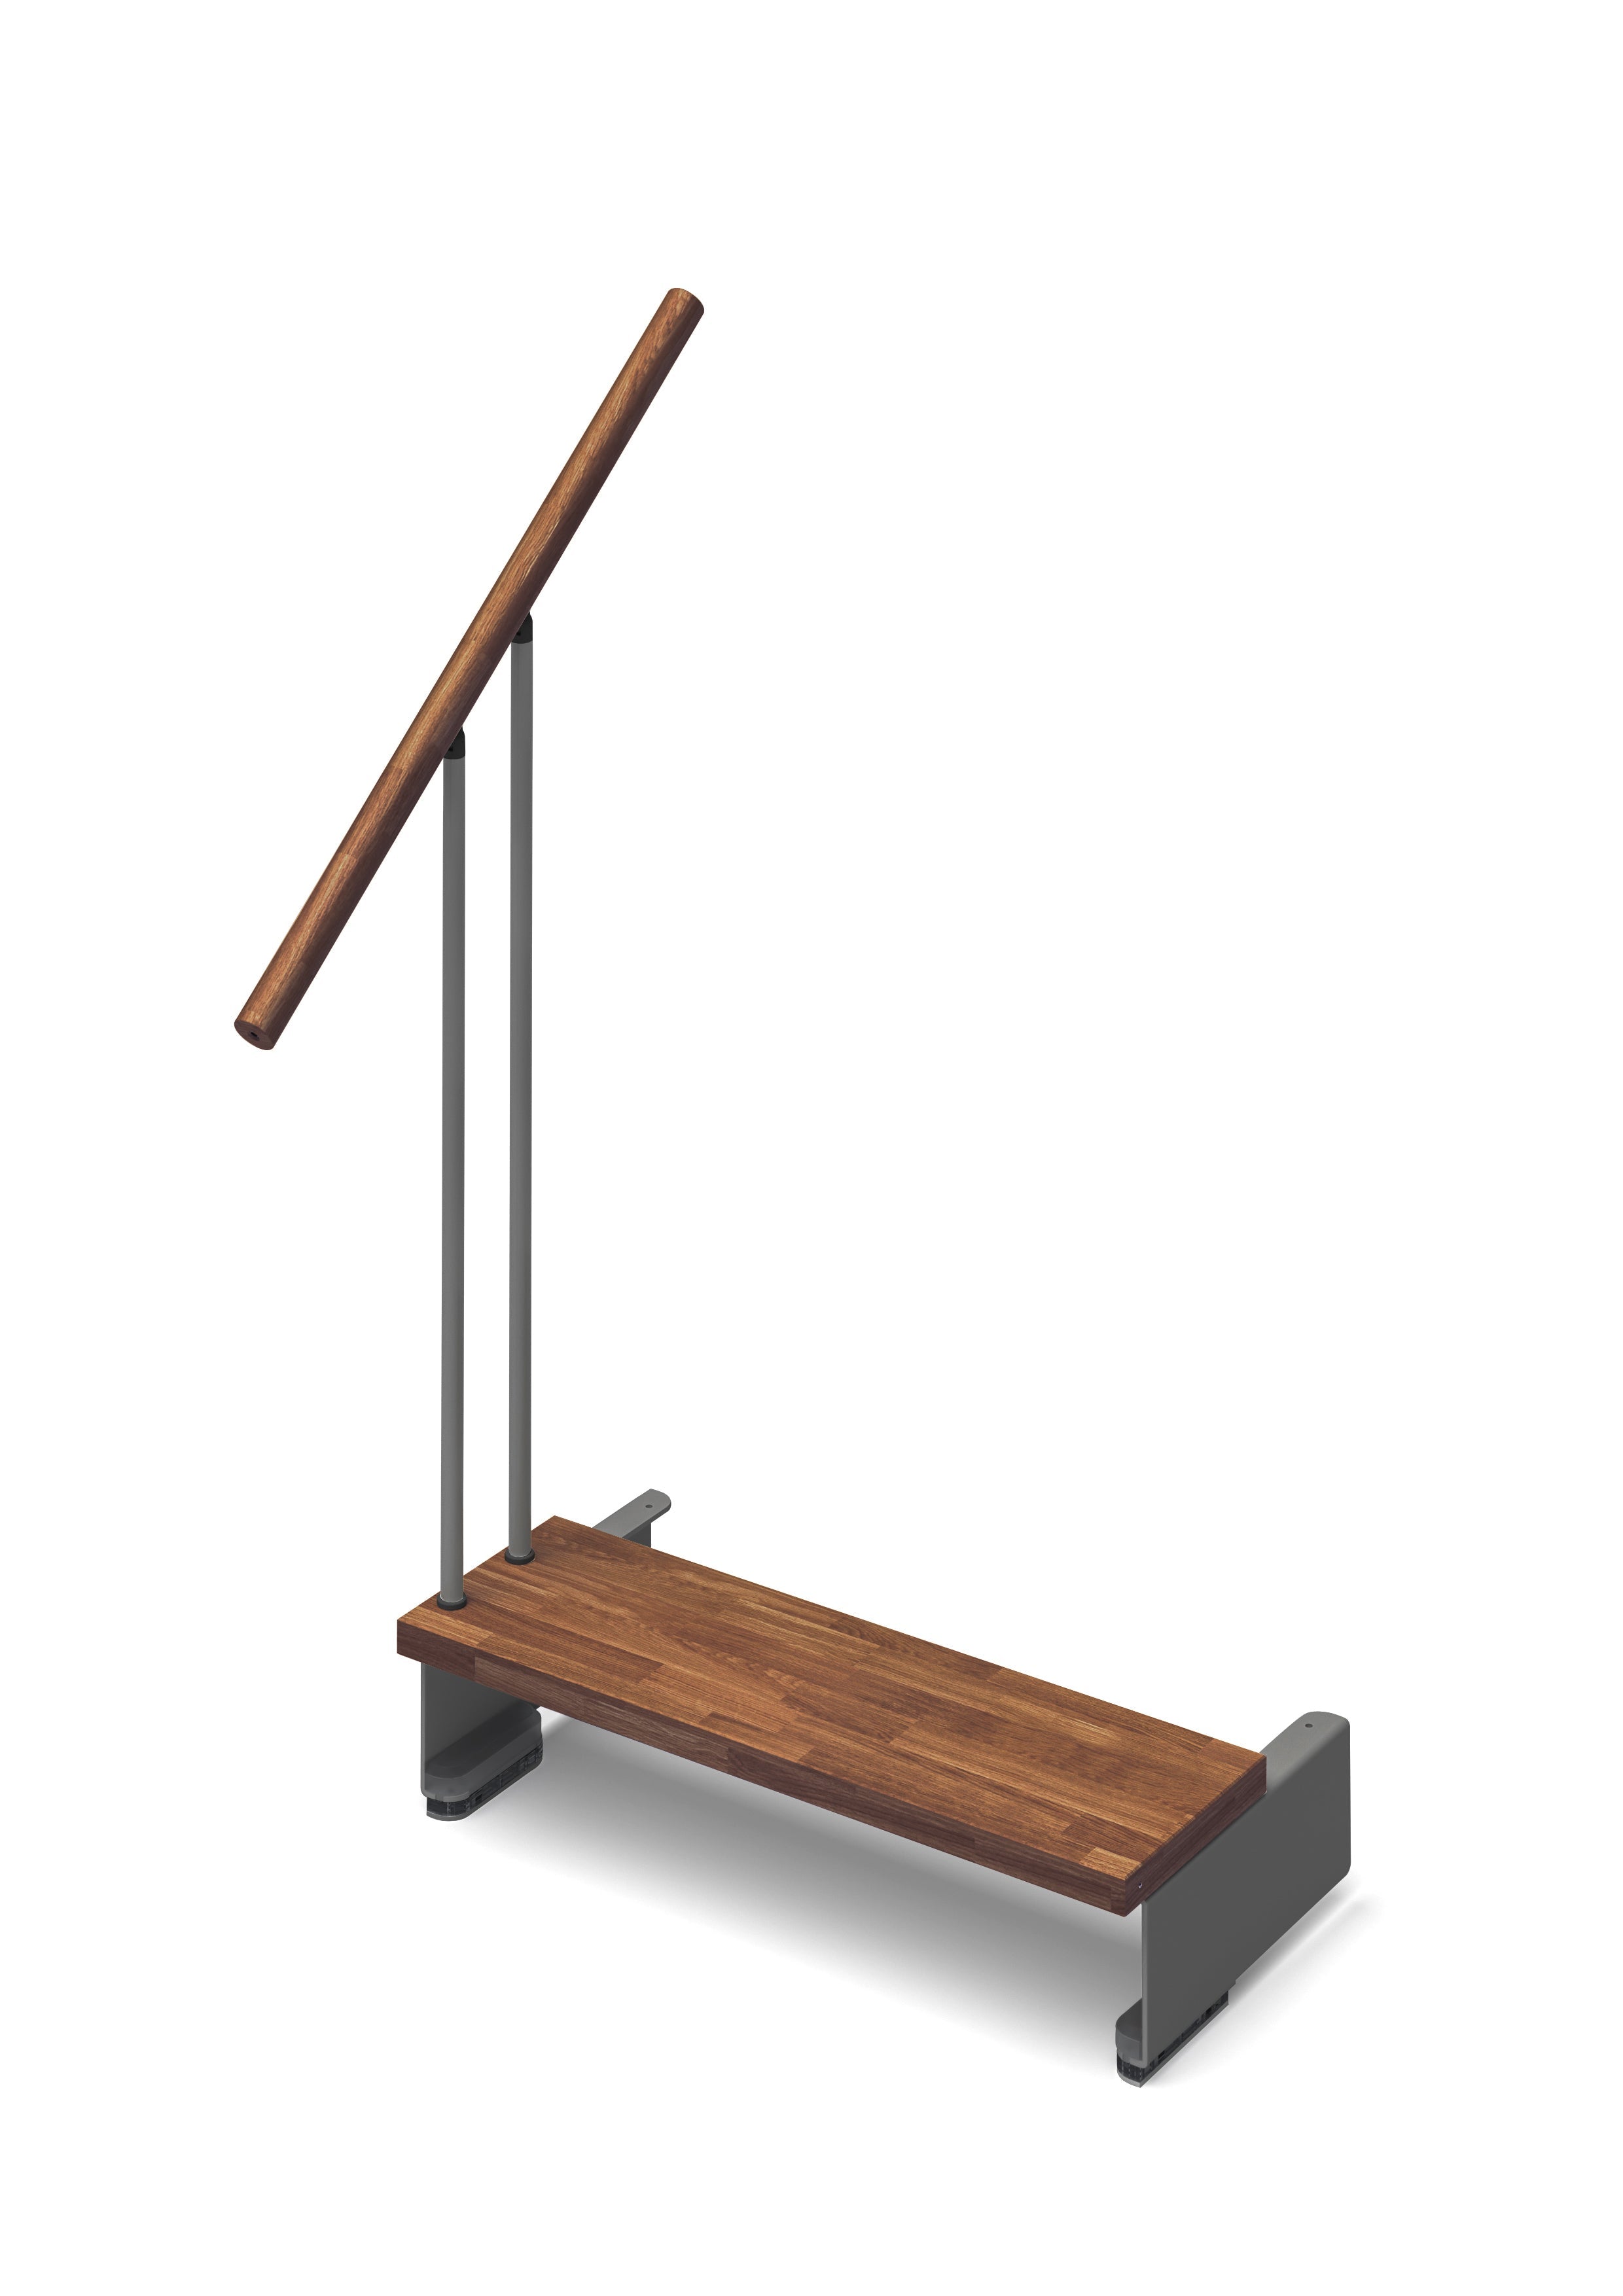 Additional step Adapta 74cm (with structure and railing) - Walnut 25